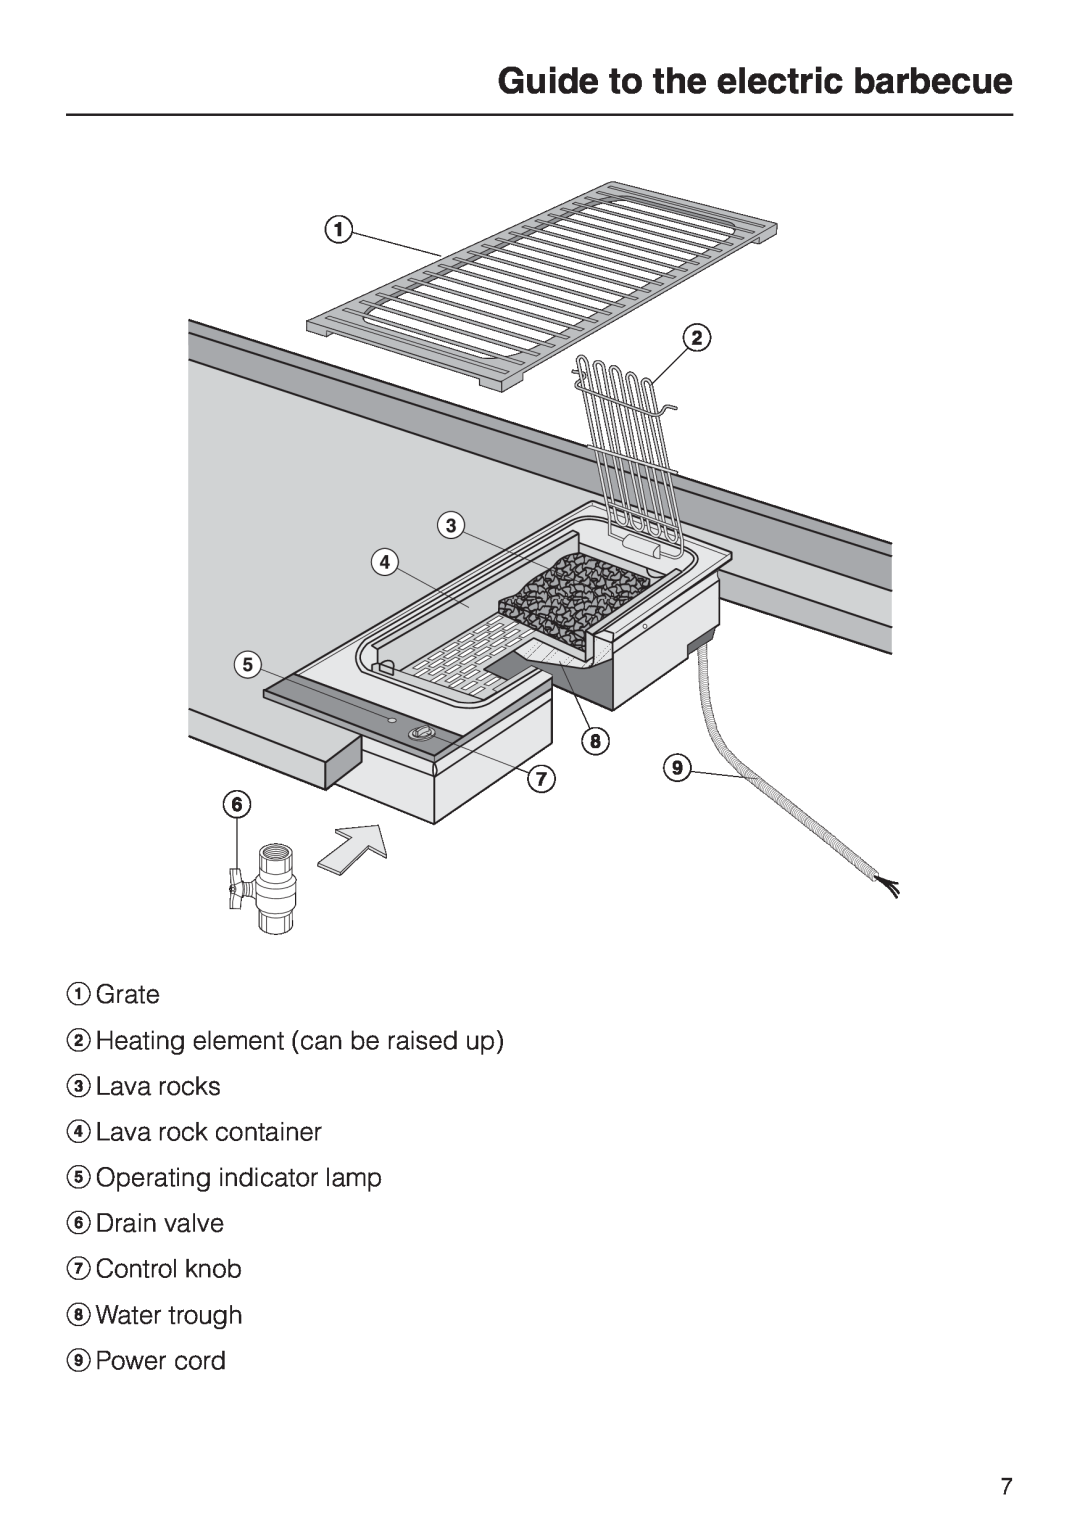 Miele KM 411 Guide to the electric barbecue, aGrate bHeating element can be raised up, cLava rocks dLava rock container 